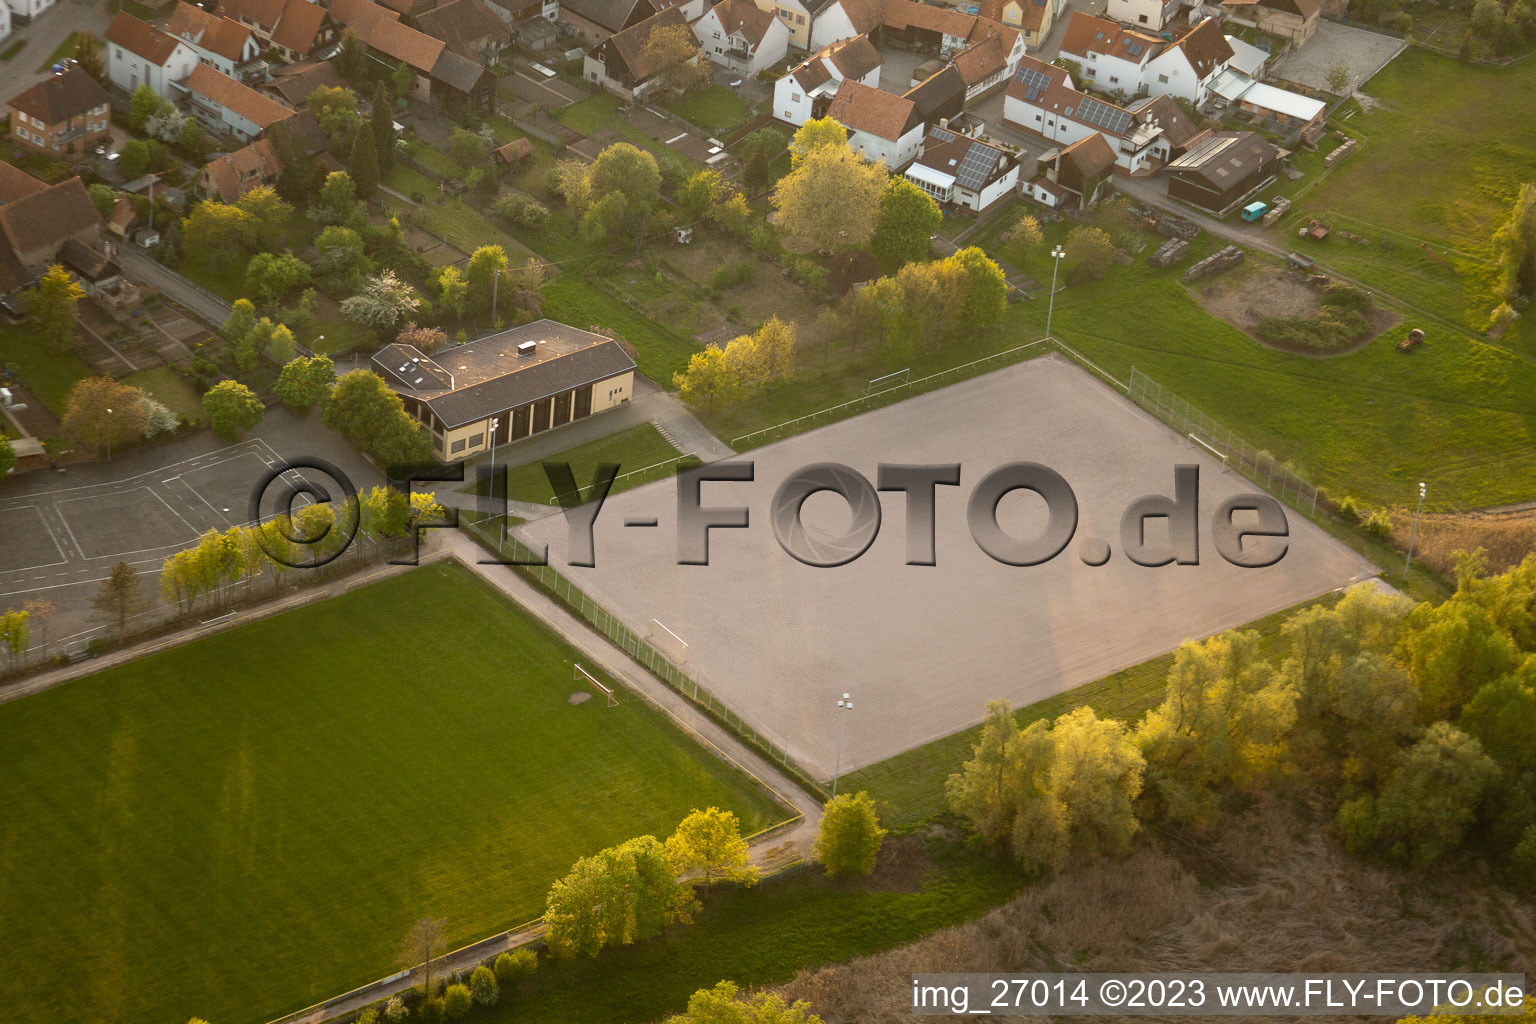 Aerial view of Soccer fields in the district Büchelberg in Wörth am Rhein in the state Rhineland-Palatinate, Germany